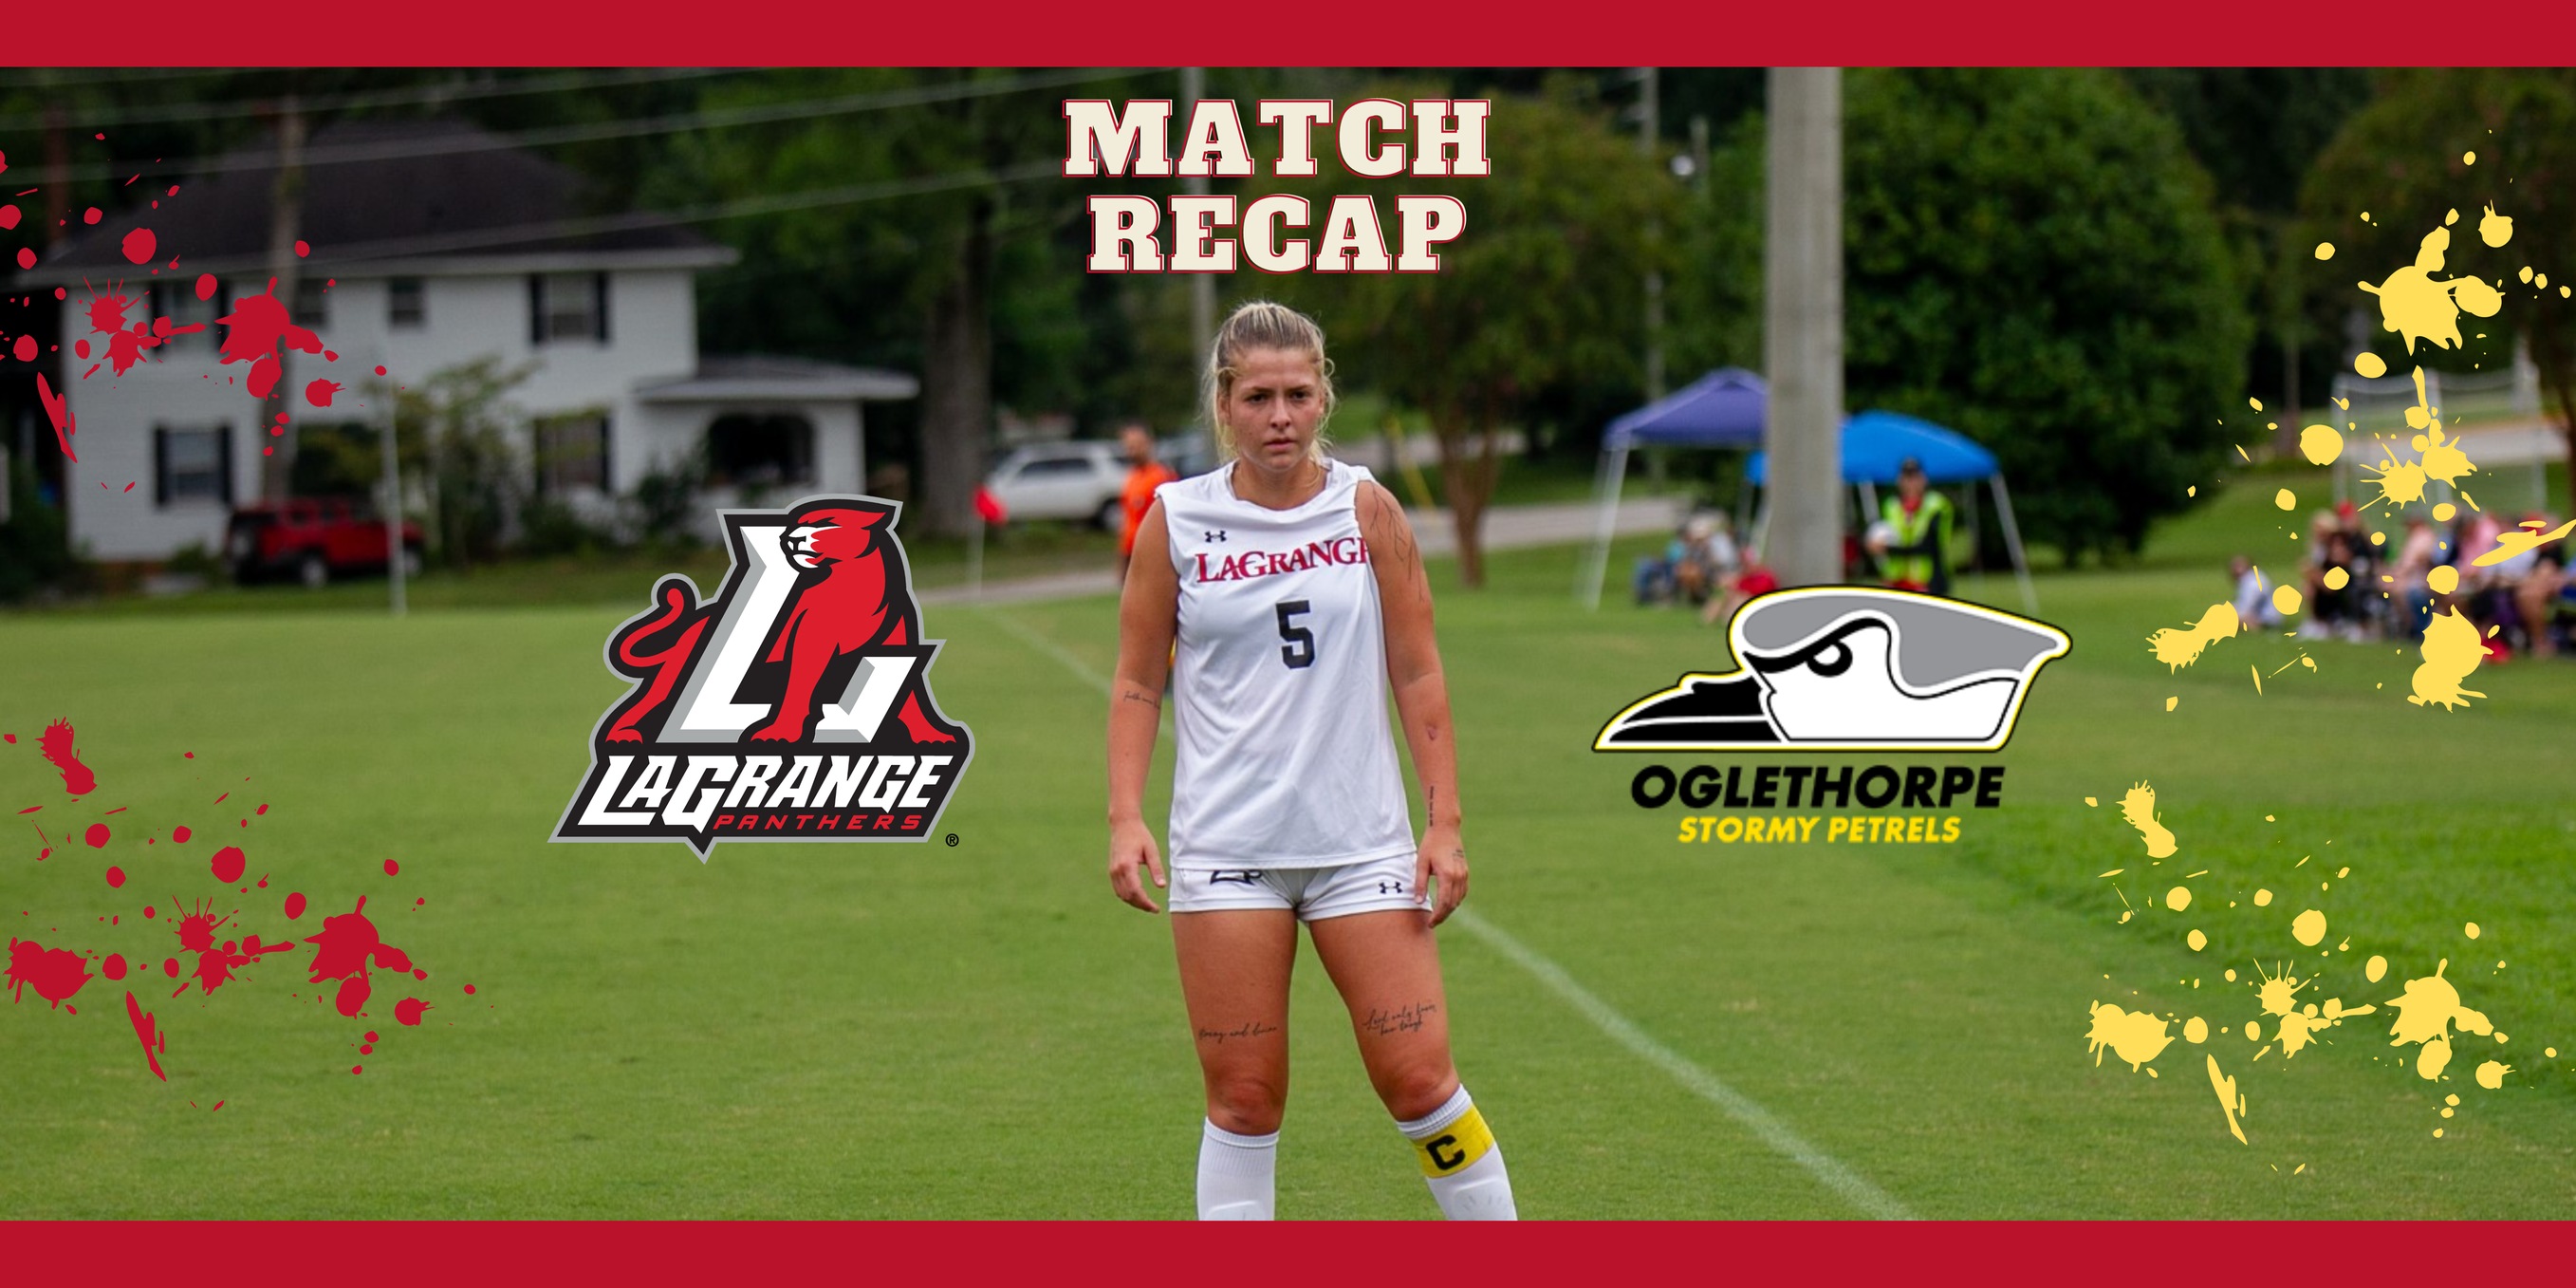 Panthers were unable to come away with a win at Oglethorpe